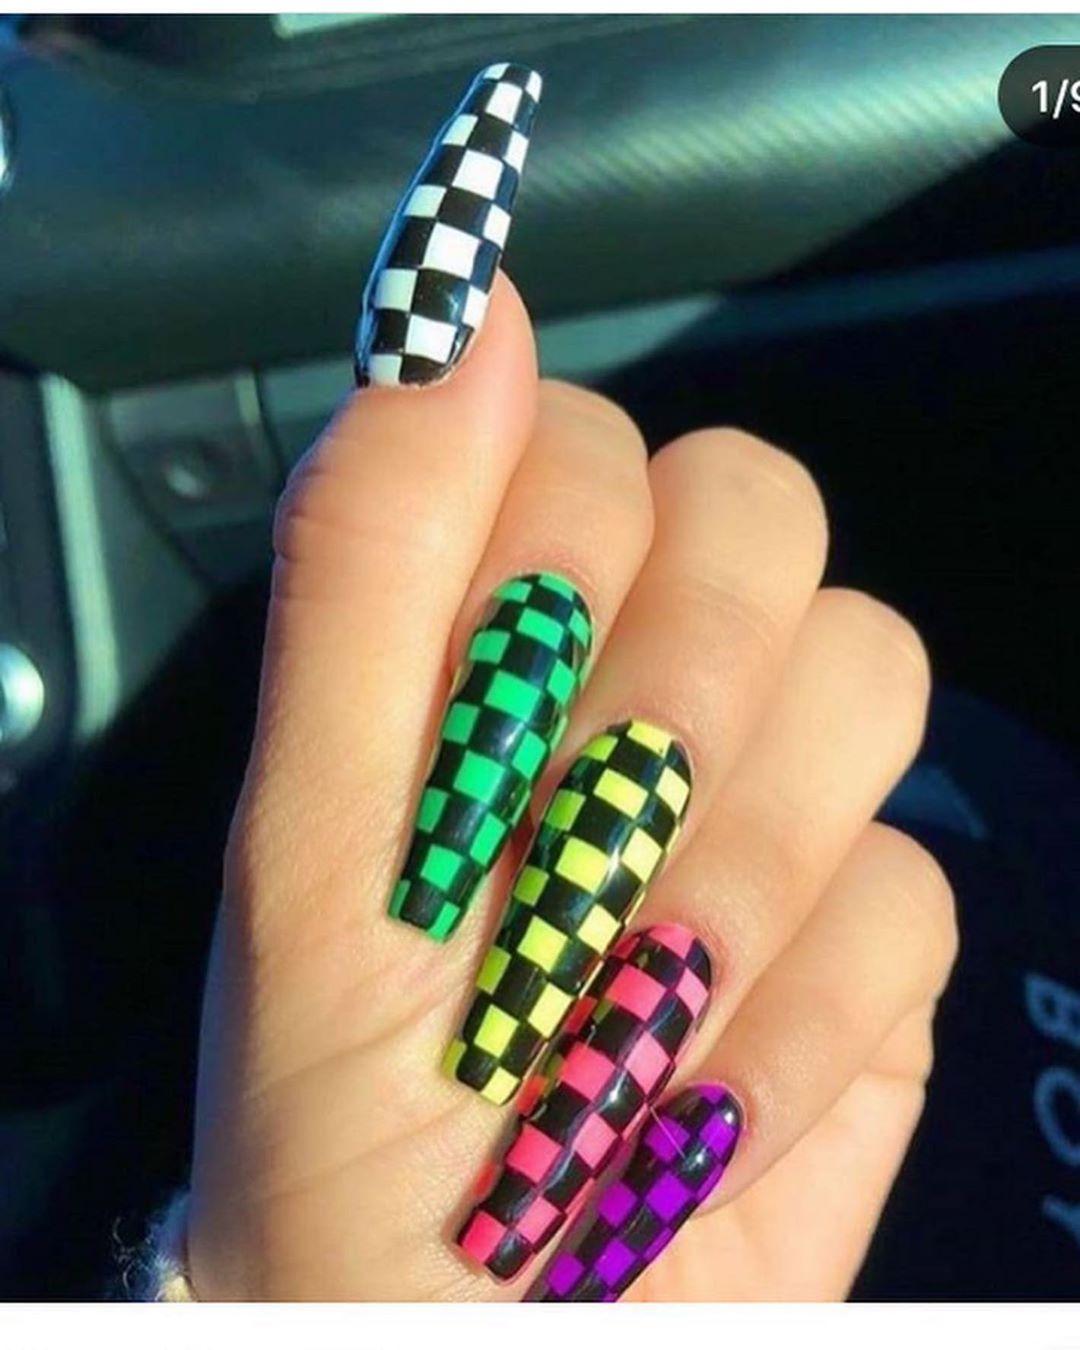 49 Outstanding Acrylic Coffin Nail Designs